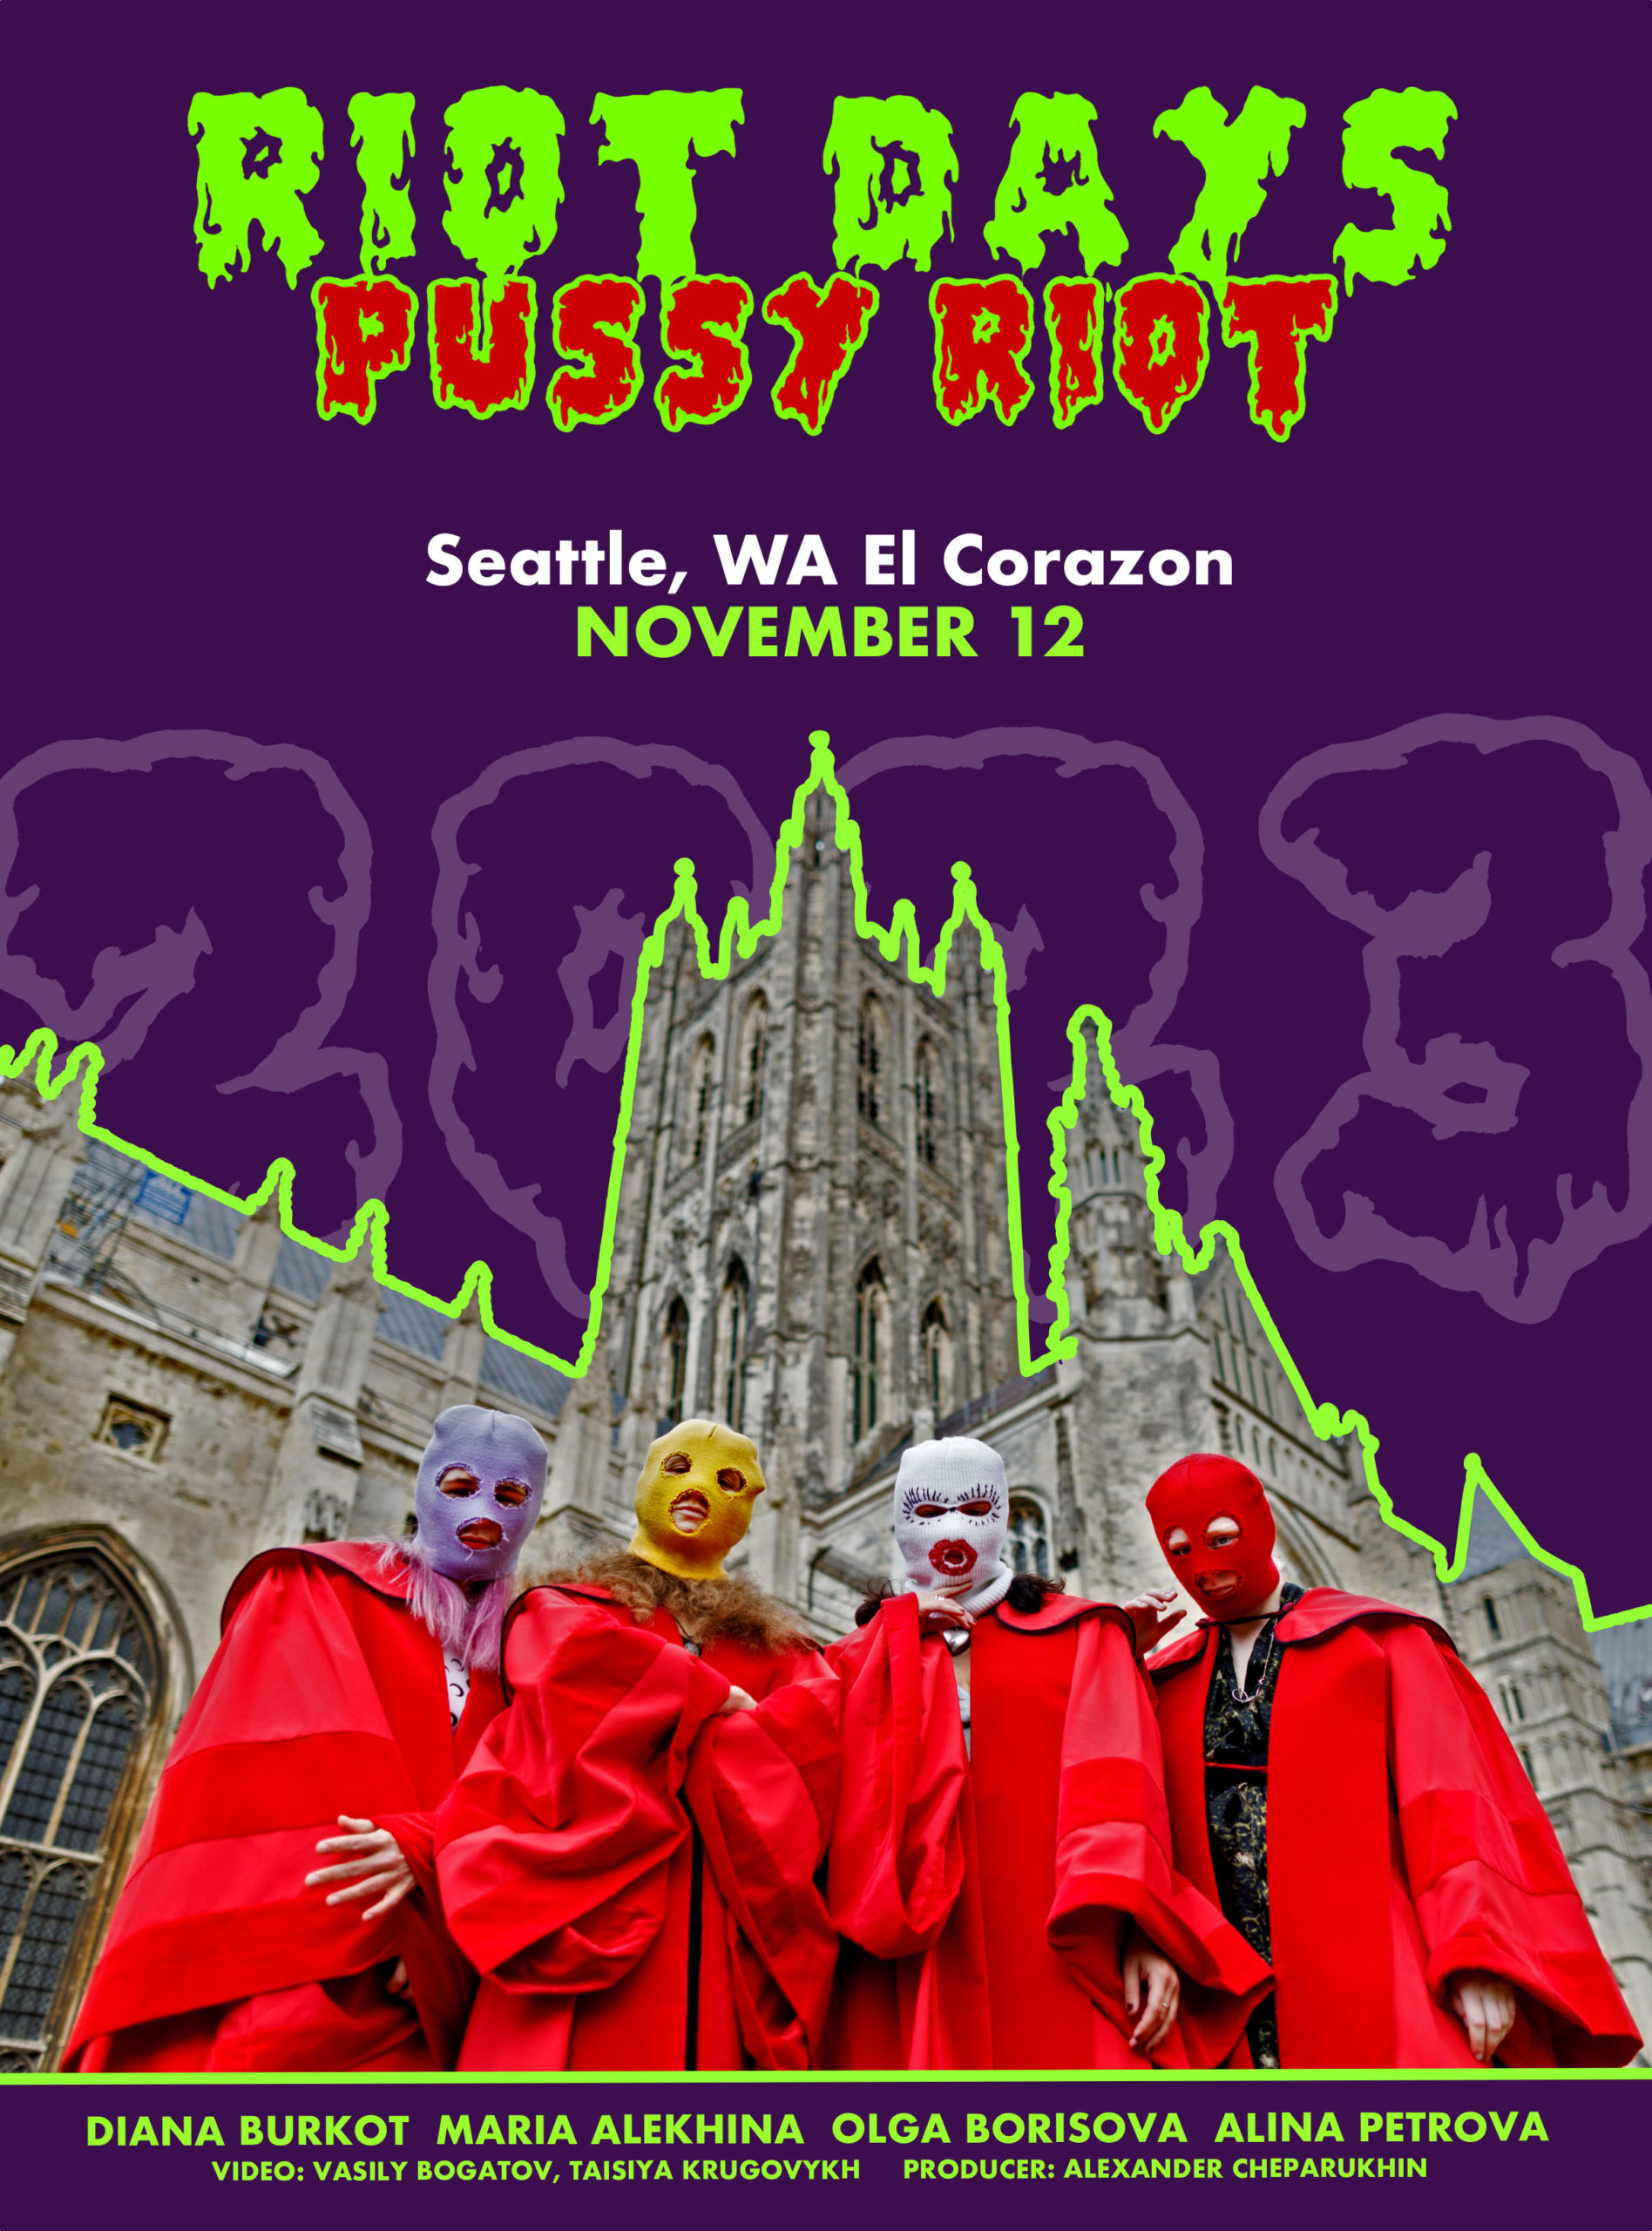 Pussy Riot SEA 2023 Localized Art scaled